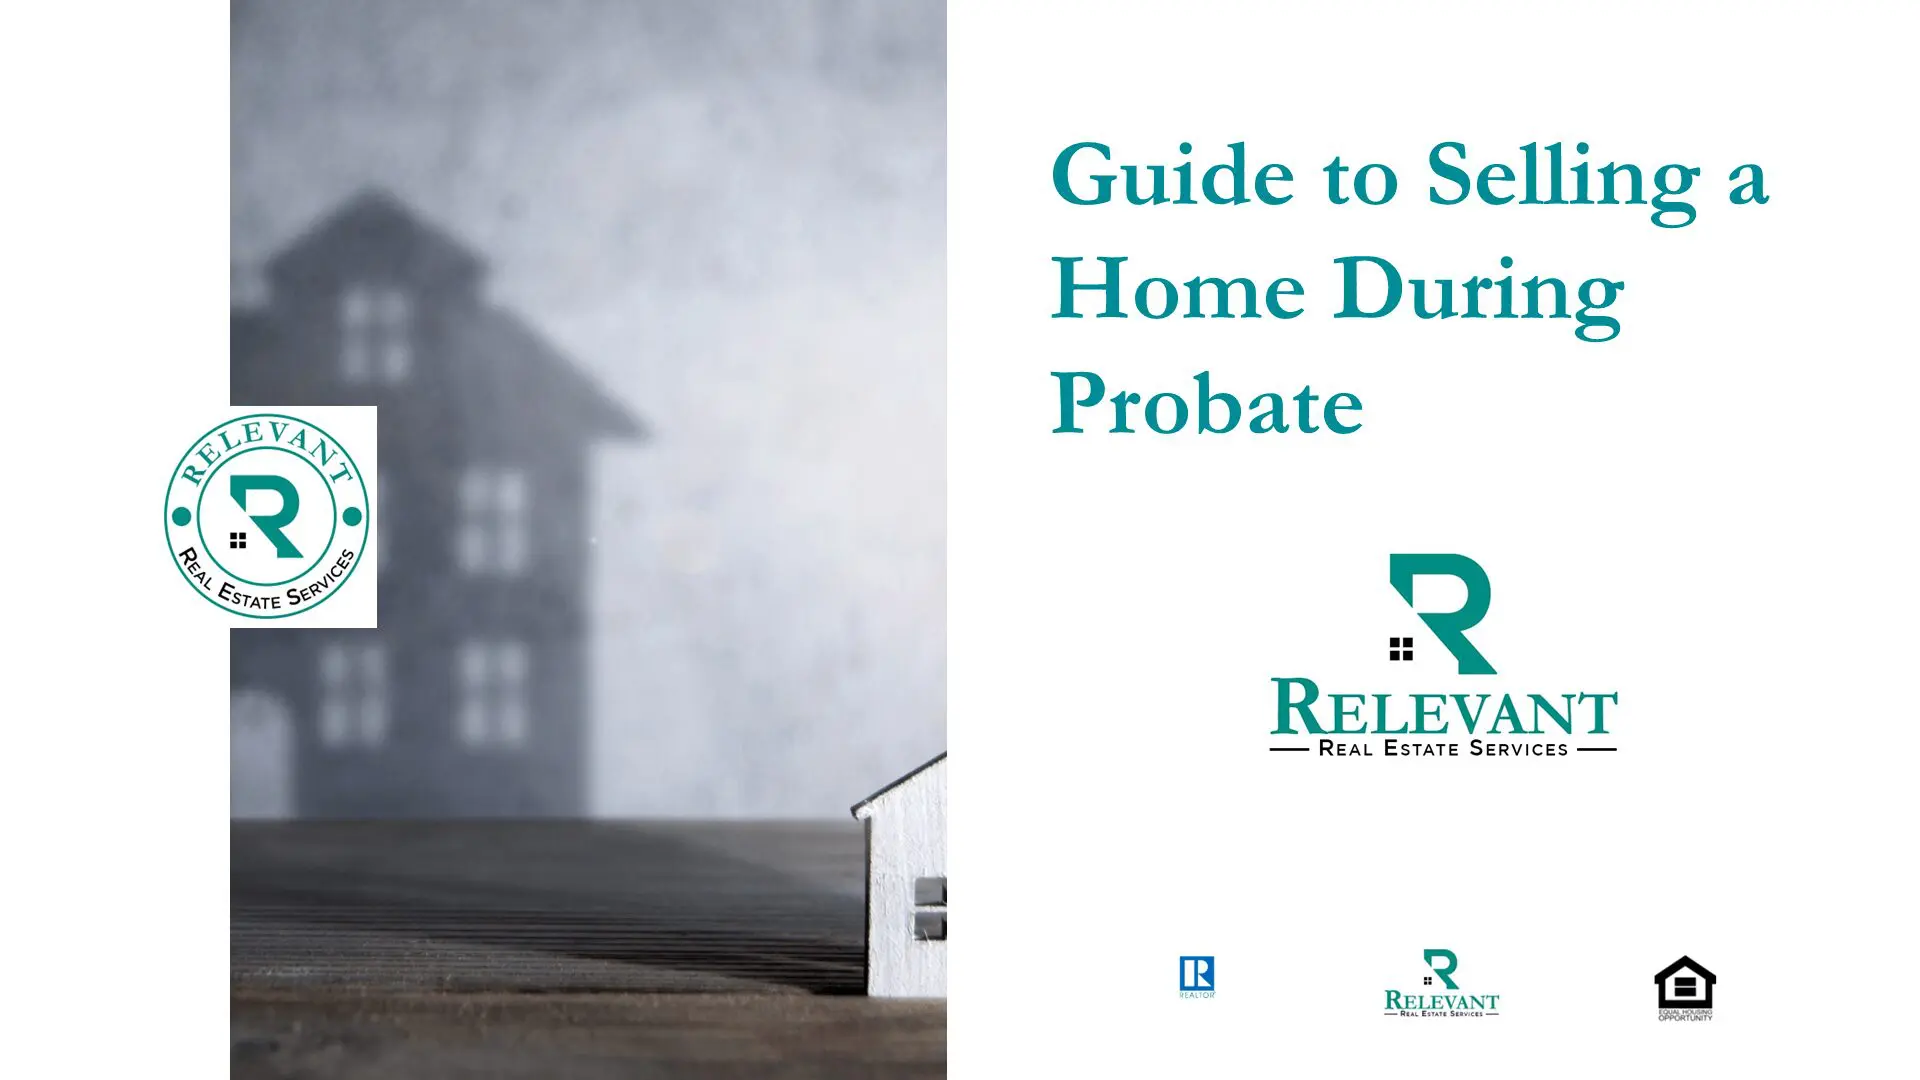 Guide to selling a home during probate